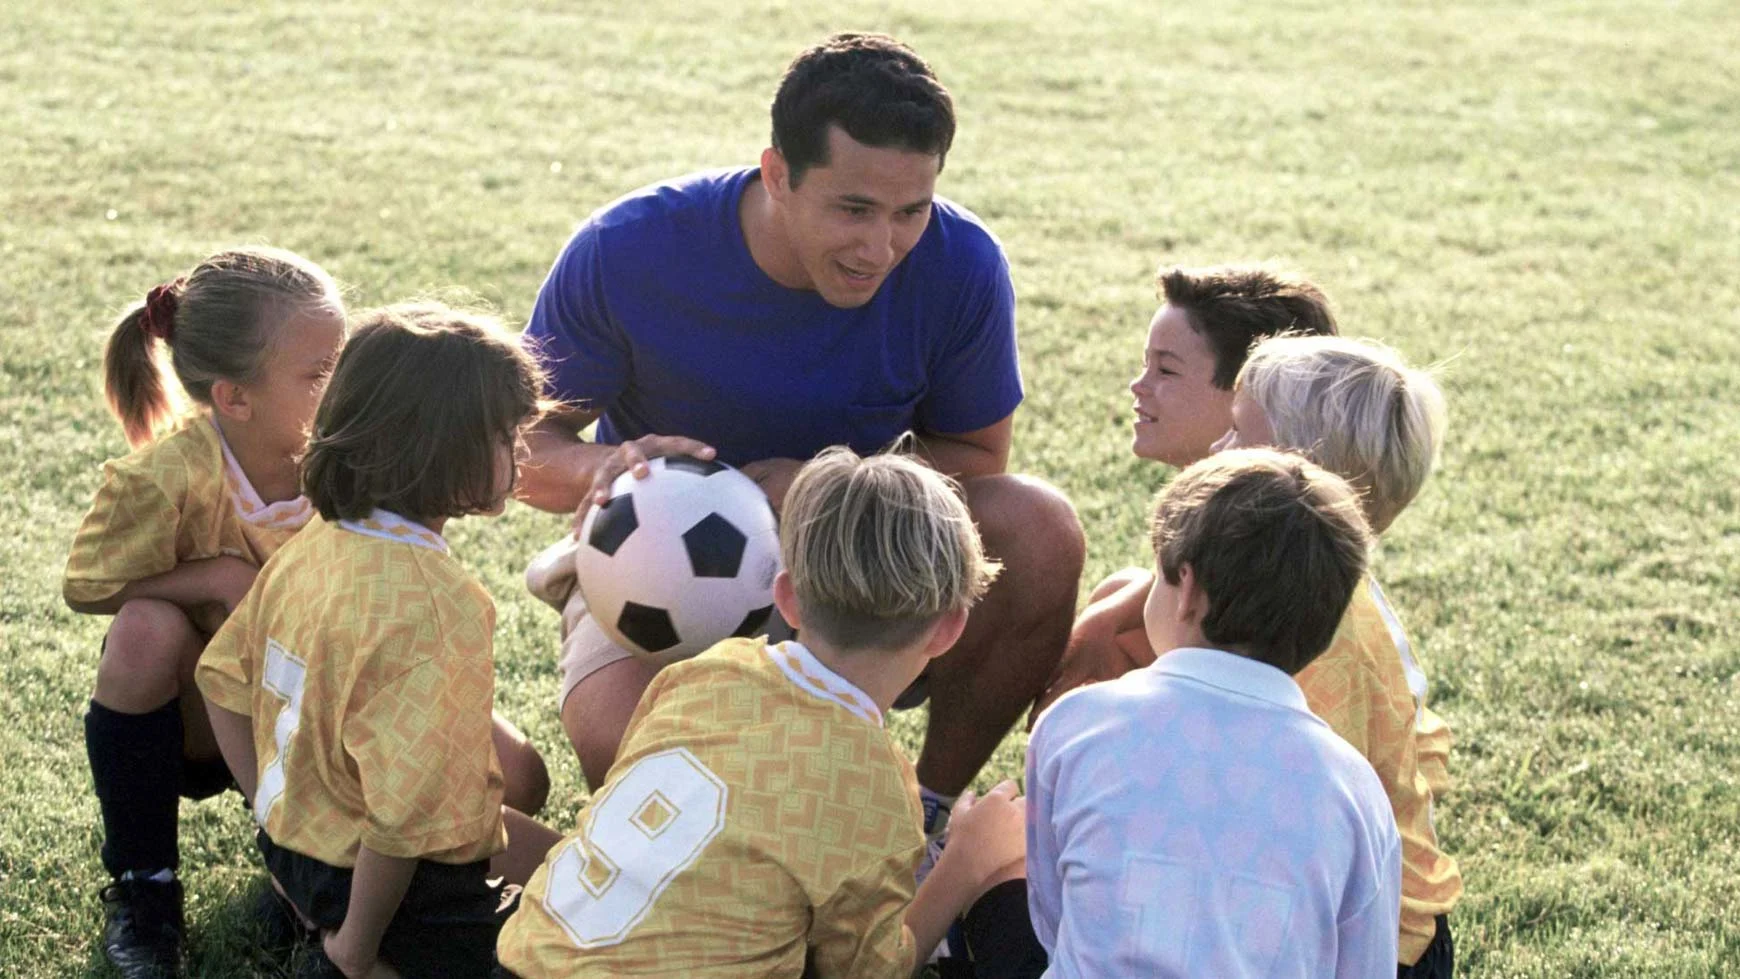 Didn't make the team? 5 tips to help your child cope